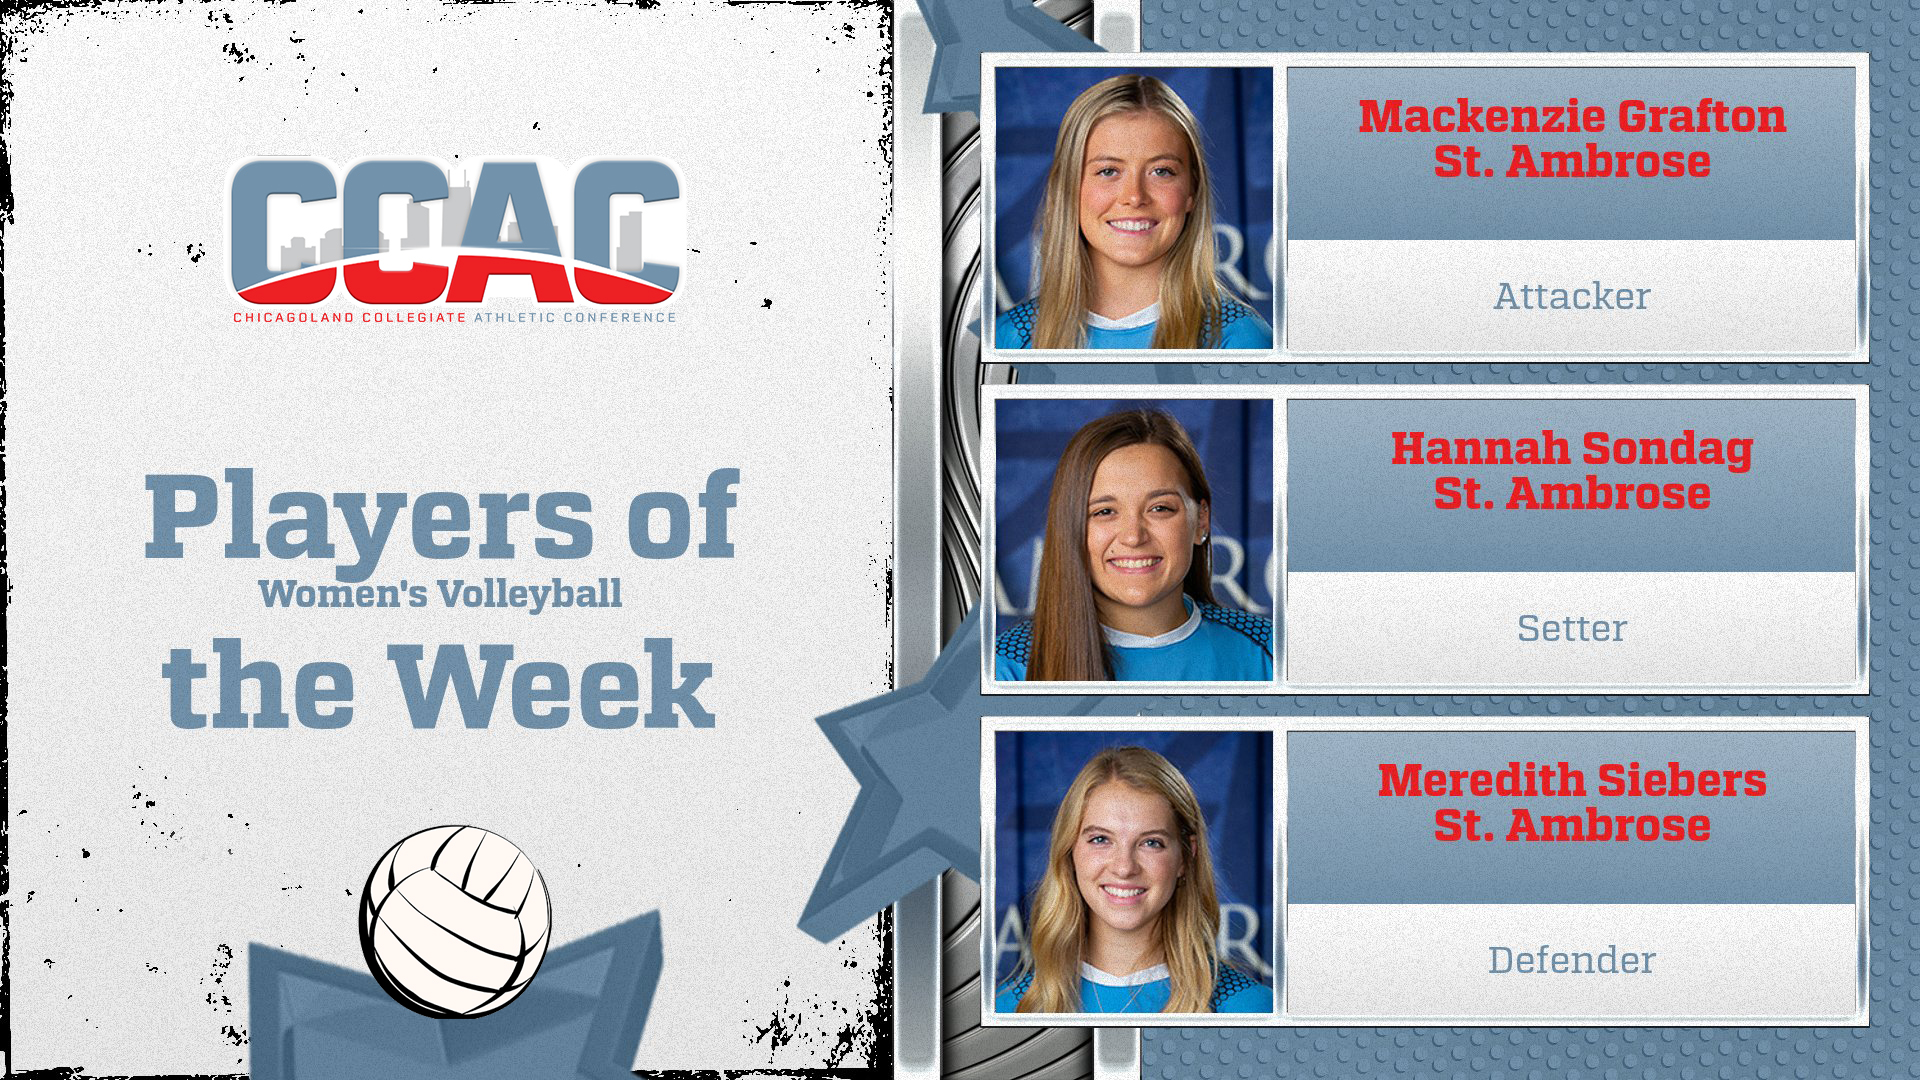 St. Ambrose sweeps conference player of the week honors